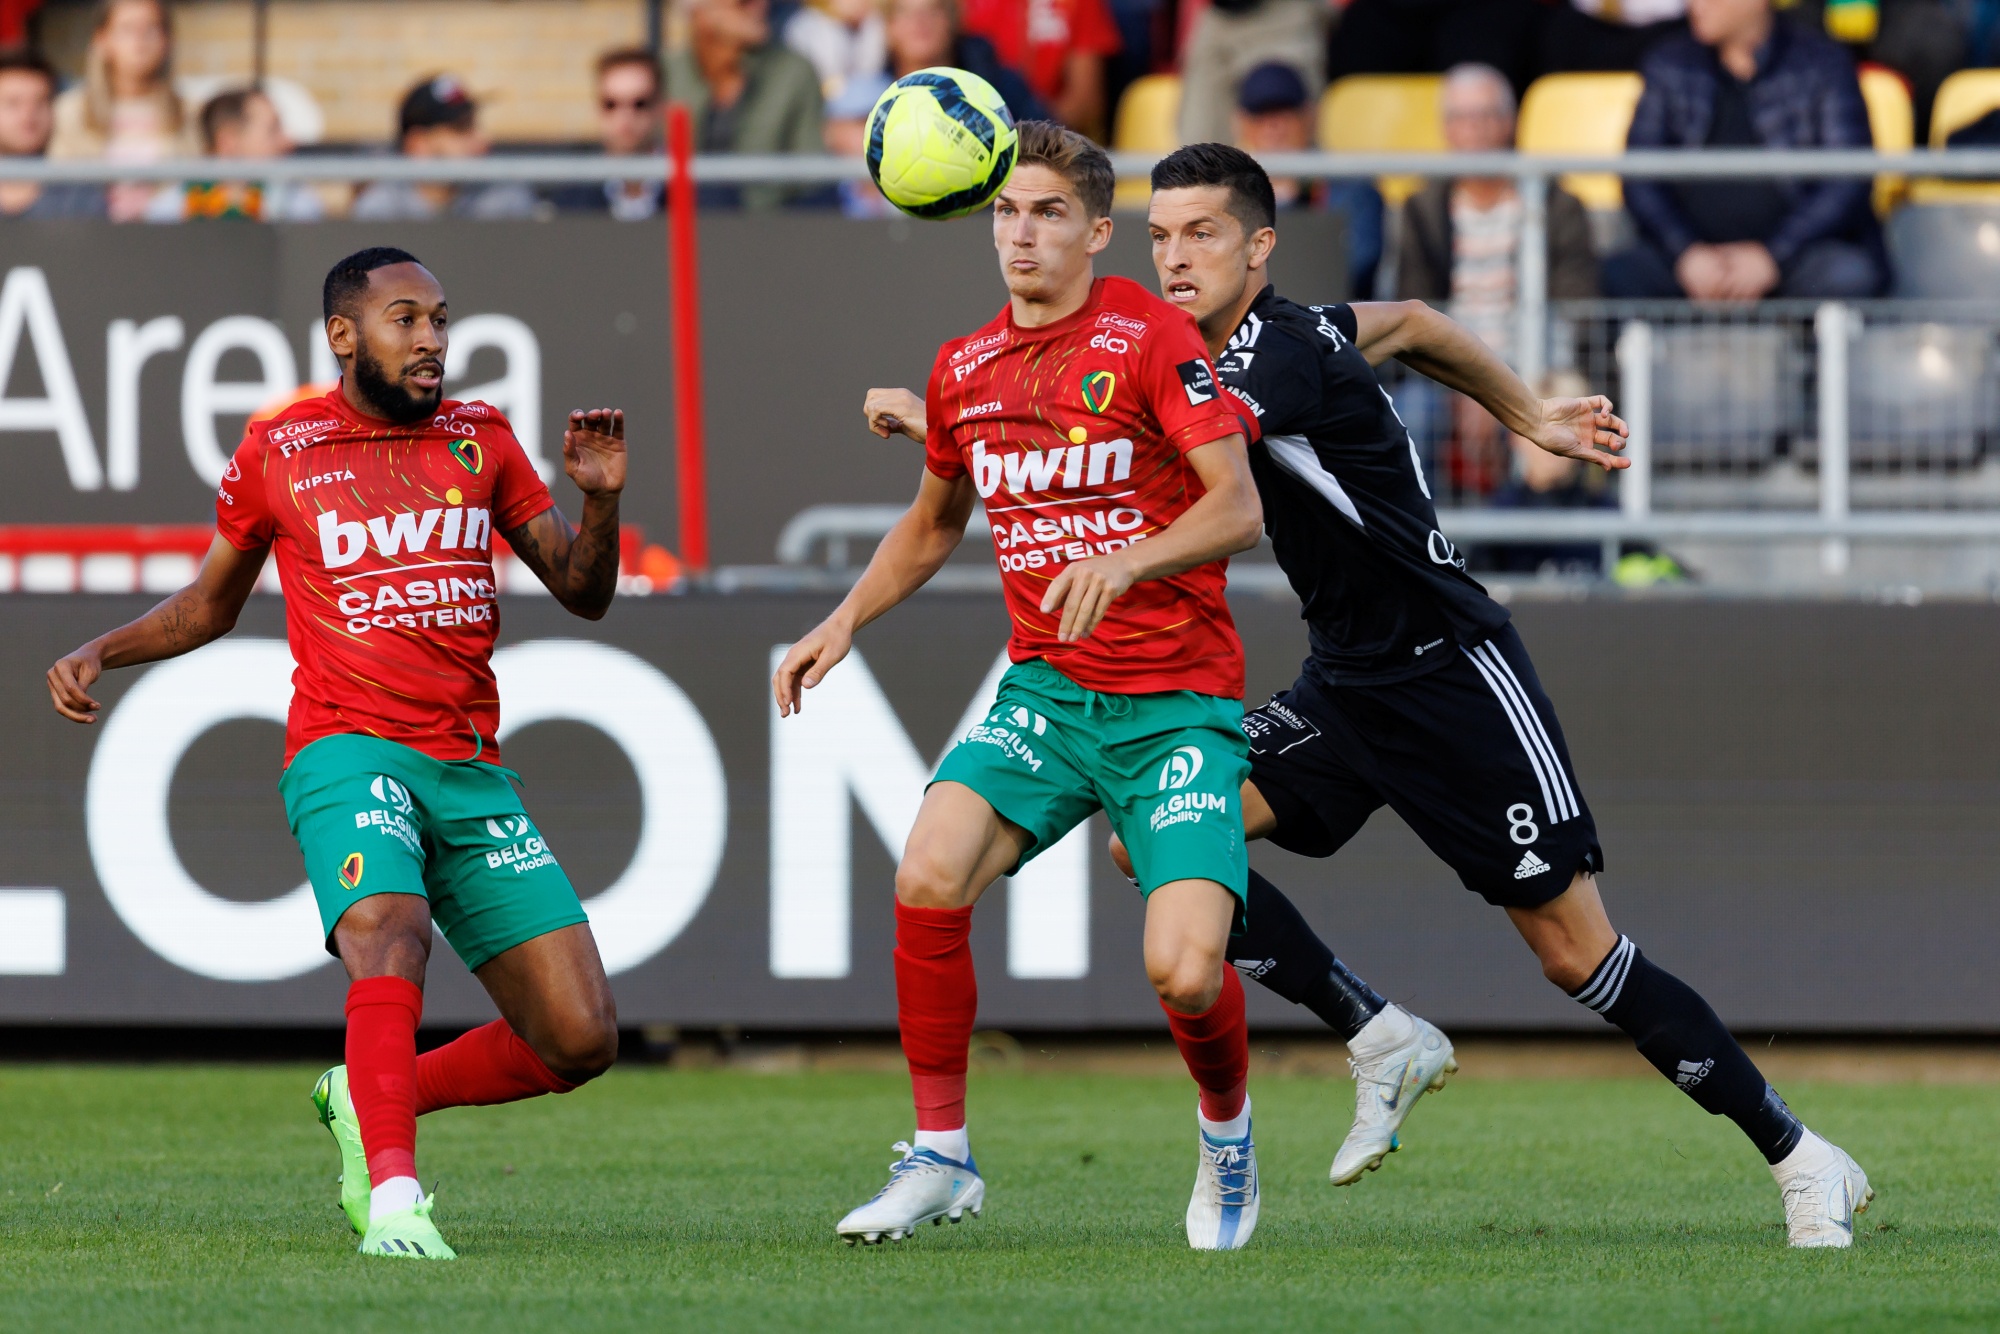 Oostende's Sieben Dewaele and Eupen's Stef Peeters fight for the ball during a soccer match between KV Oostende and KAS Eupen, Saturday 10 September 2022 in Oostende, on day 8 of the 2022-2023 'Jupiler Pro League' first division of the Belgian championship. BELGA PHOTO KURT DESPLENTER